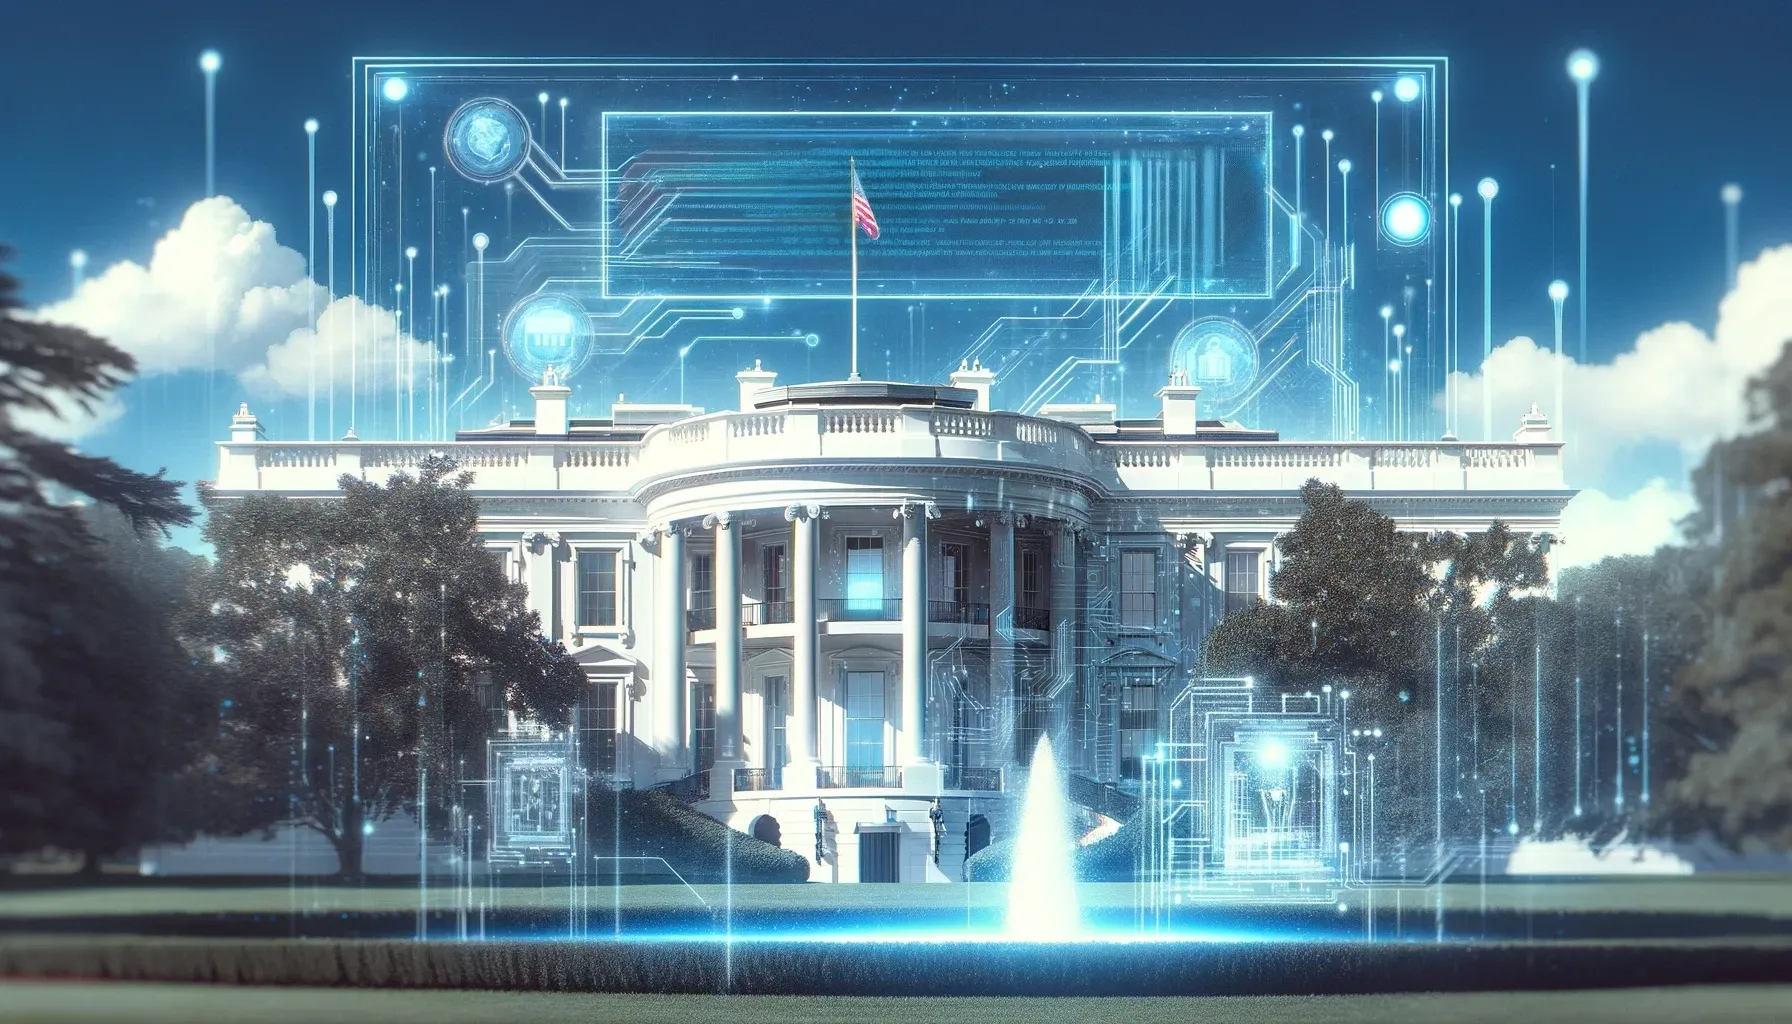 The white house with a digital interface overlay